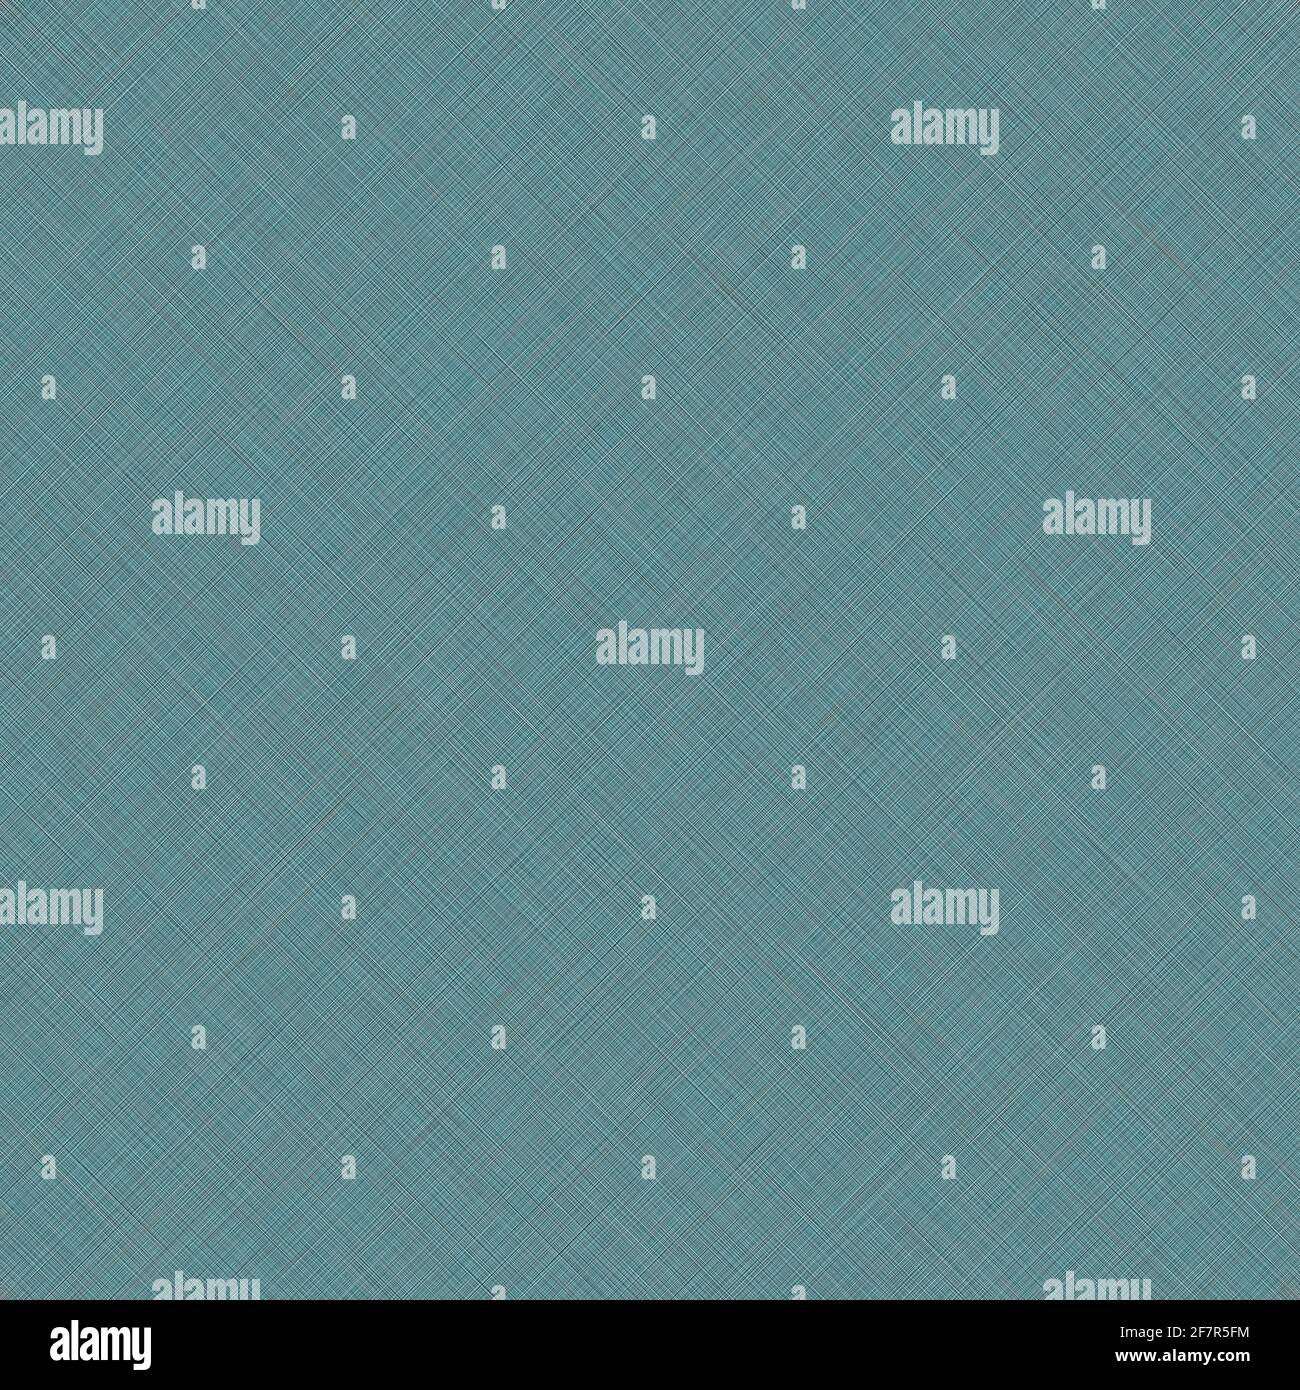 Abstract big digital background with thin diagonal orthogonal lines in pale turquoise hues as a modern fabric texture Stock Photo